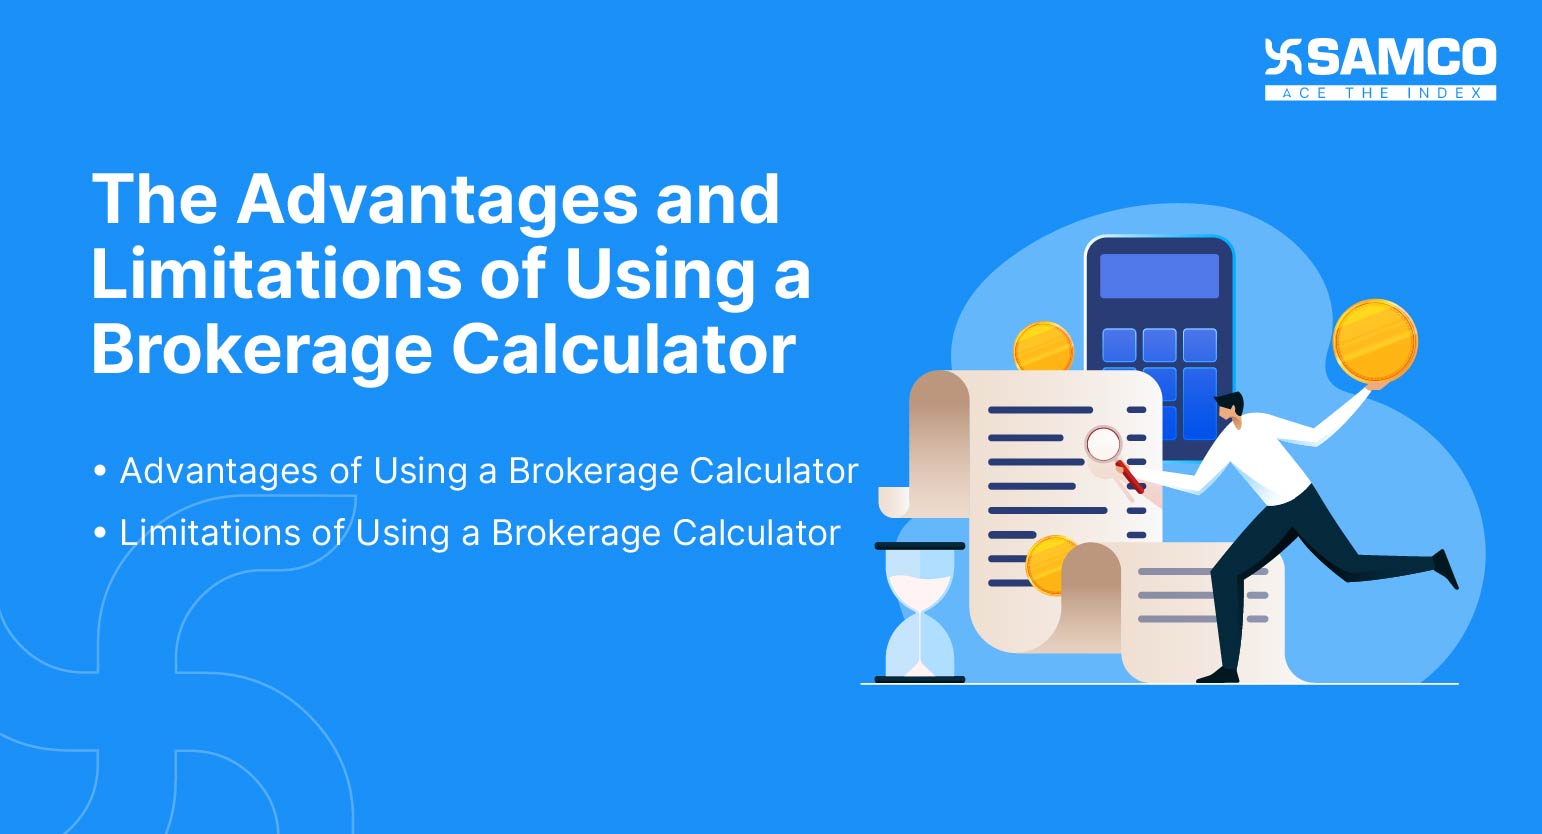 The Advantages and Limitations of Using a Brokerage Calculator